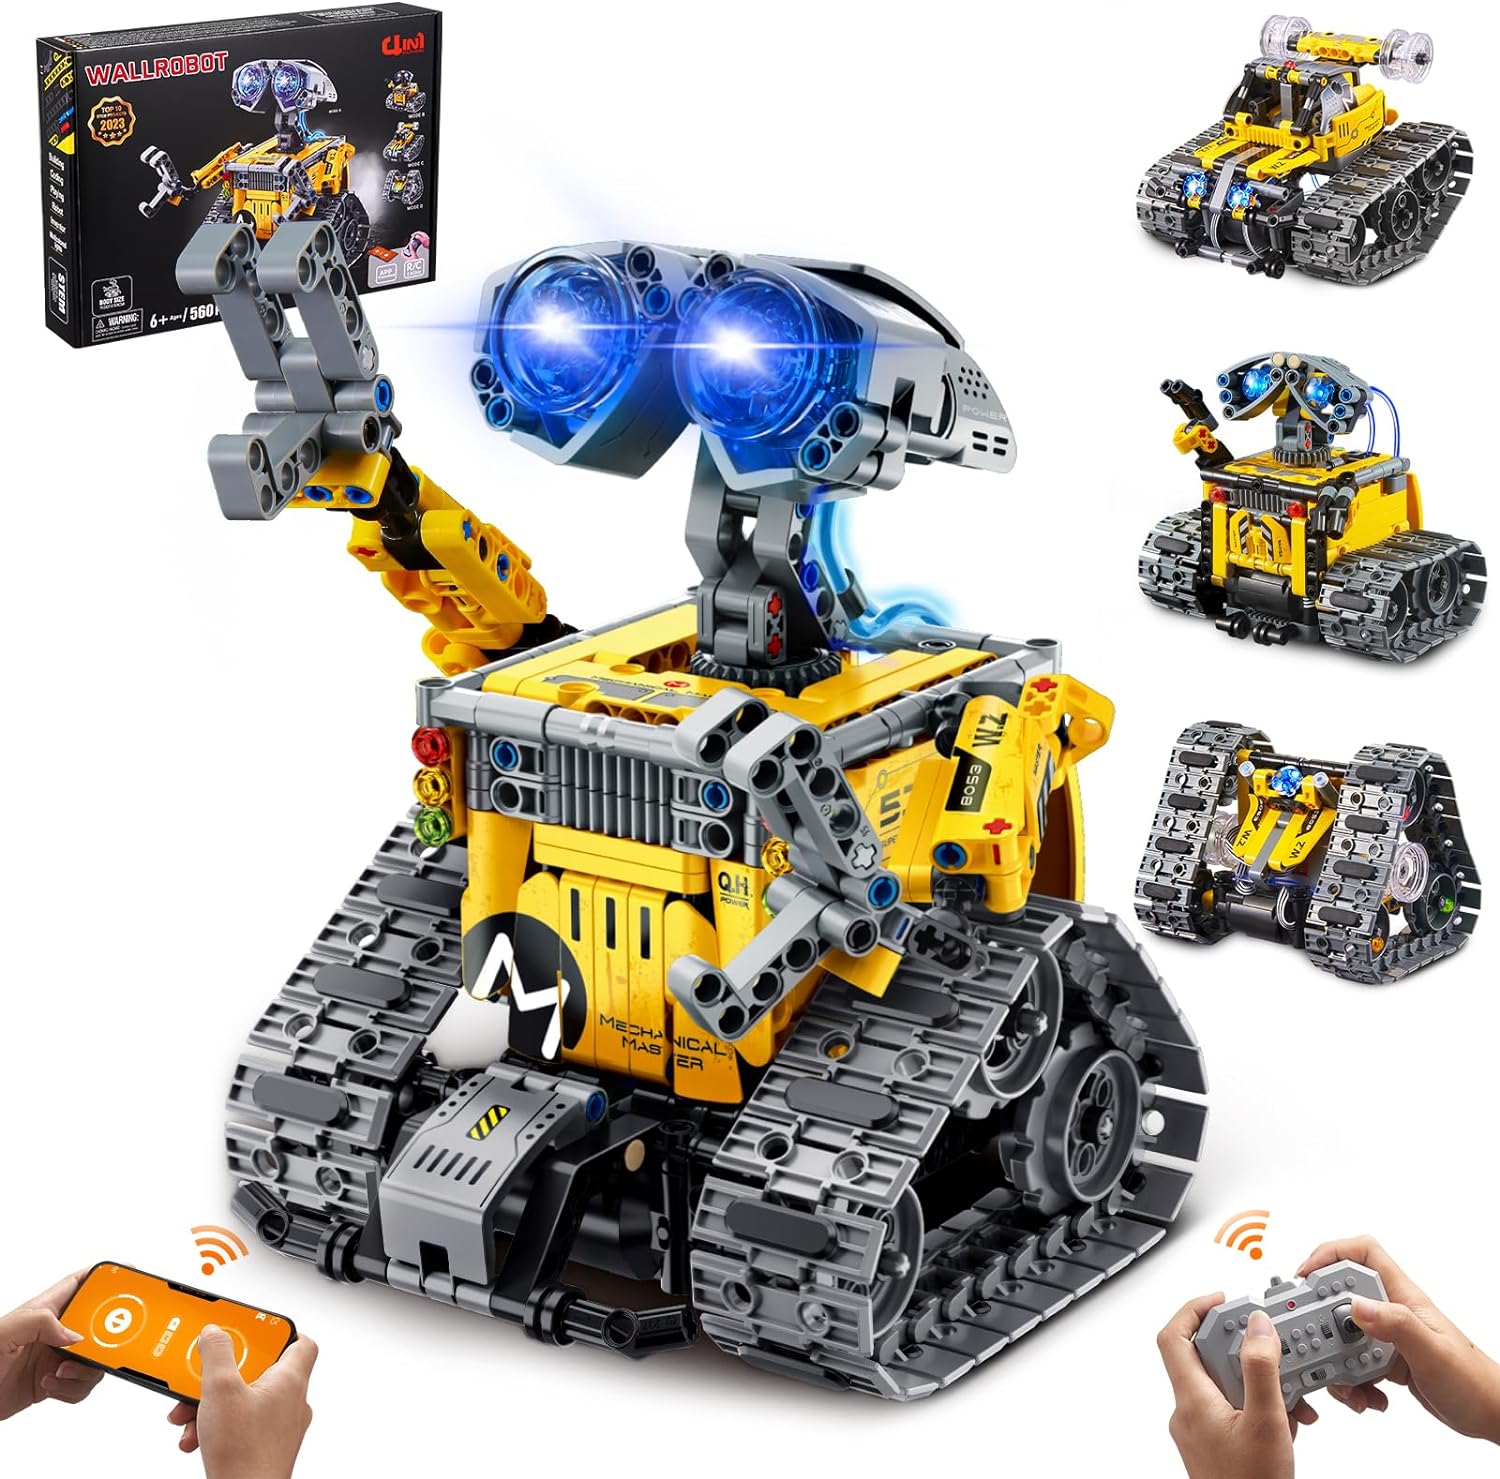 This is not an official Lego toy but it' fully compatible with Lego. I wanted to get a nice motorized Technic Lego set for my son for Christmas, but they either don't make them anymore, or were all sold out if they do. I came across this and was hesitant knowing how awful off-brand Lego toys were when I experienced them as a kid, but I figured with that many reviews, they couldn't be wrong.These are as close to Lego quality as I could imagine, without having the official Lego stamp. The batte